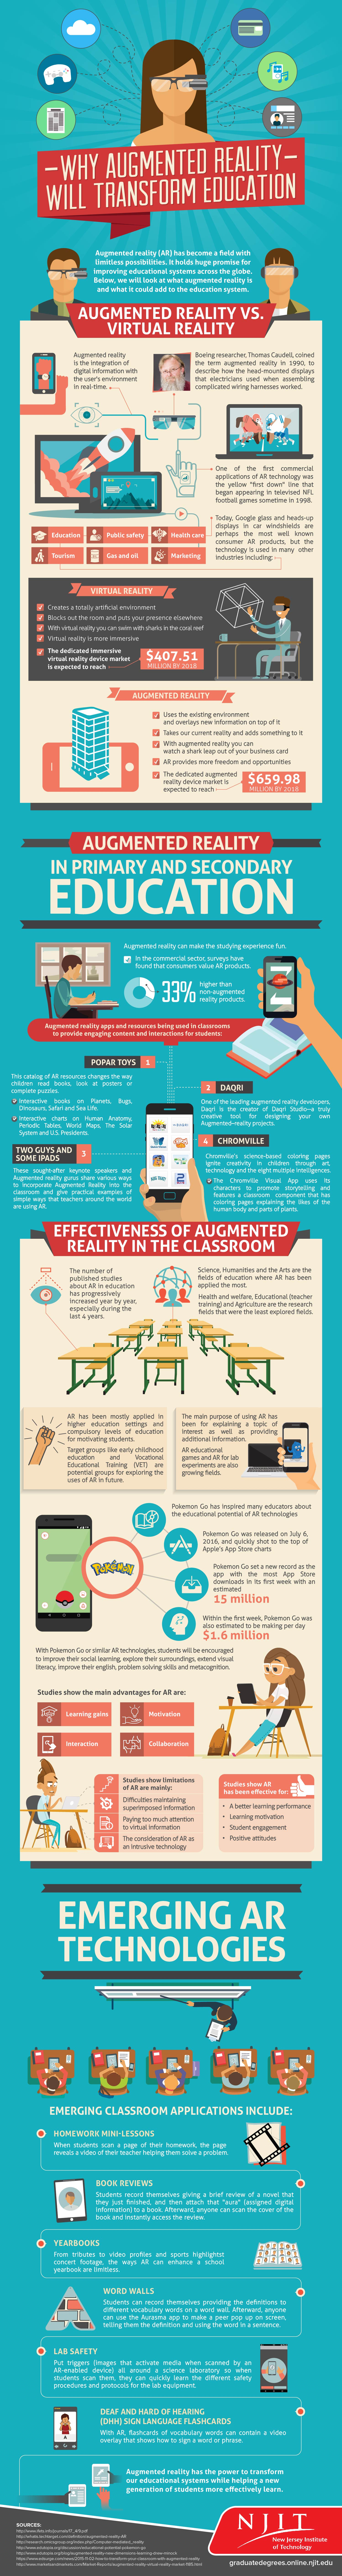 Augmented reality in education infographic